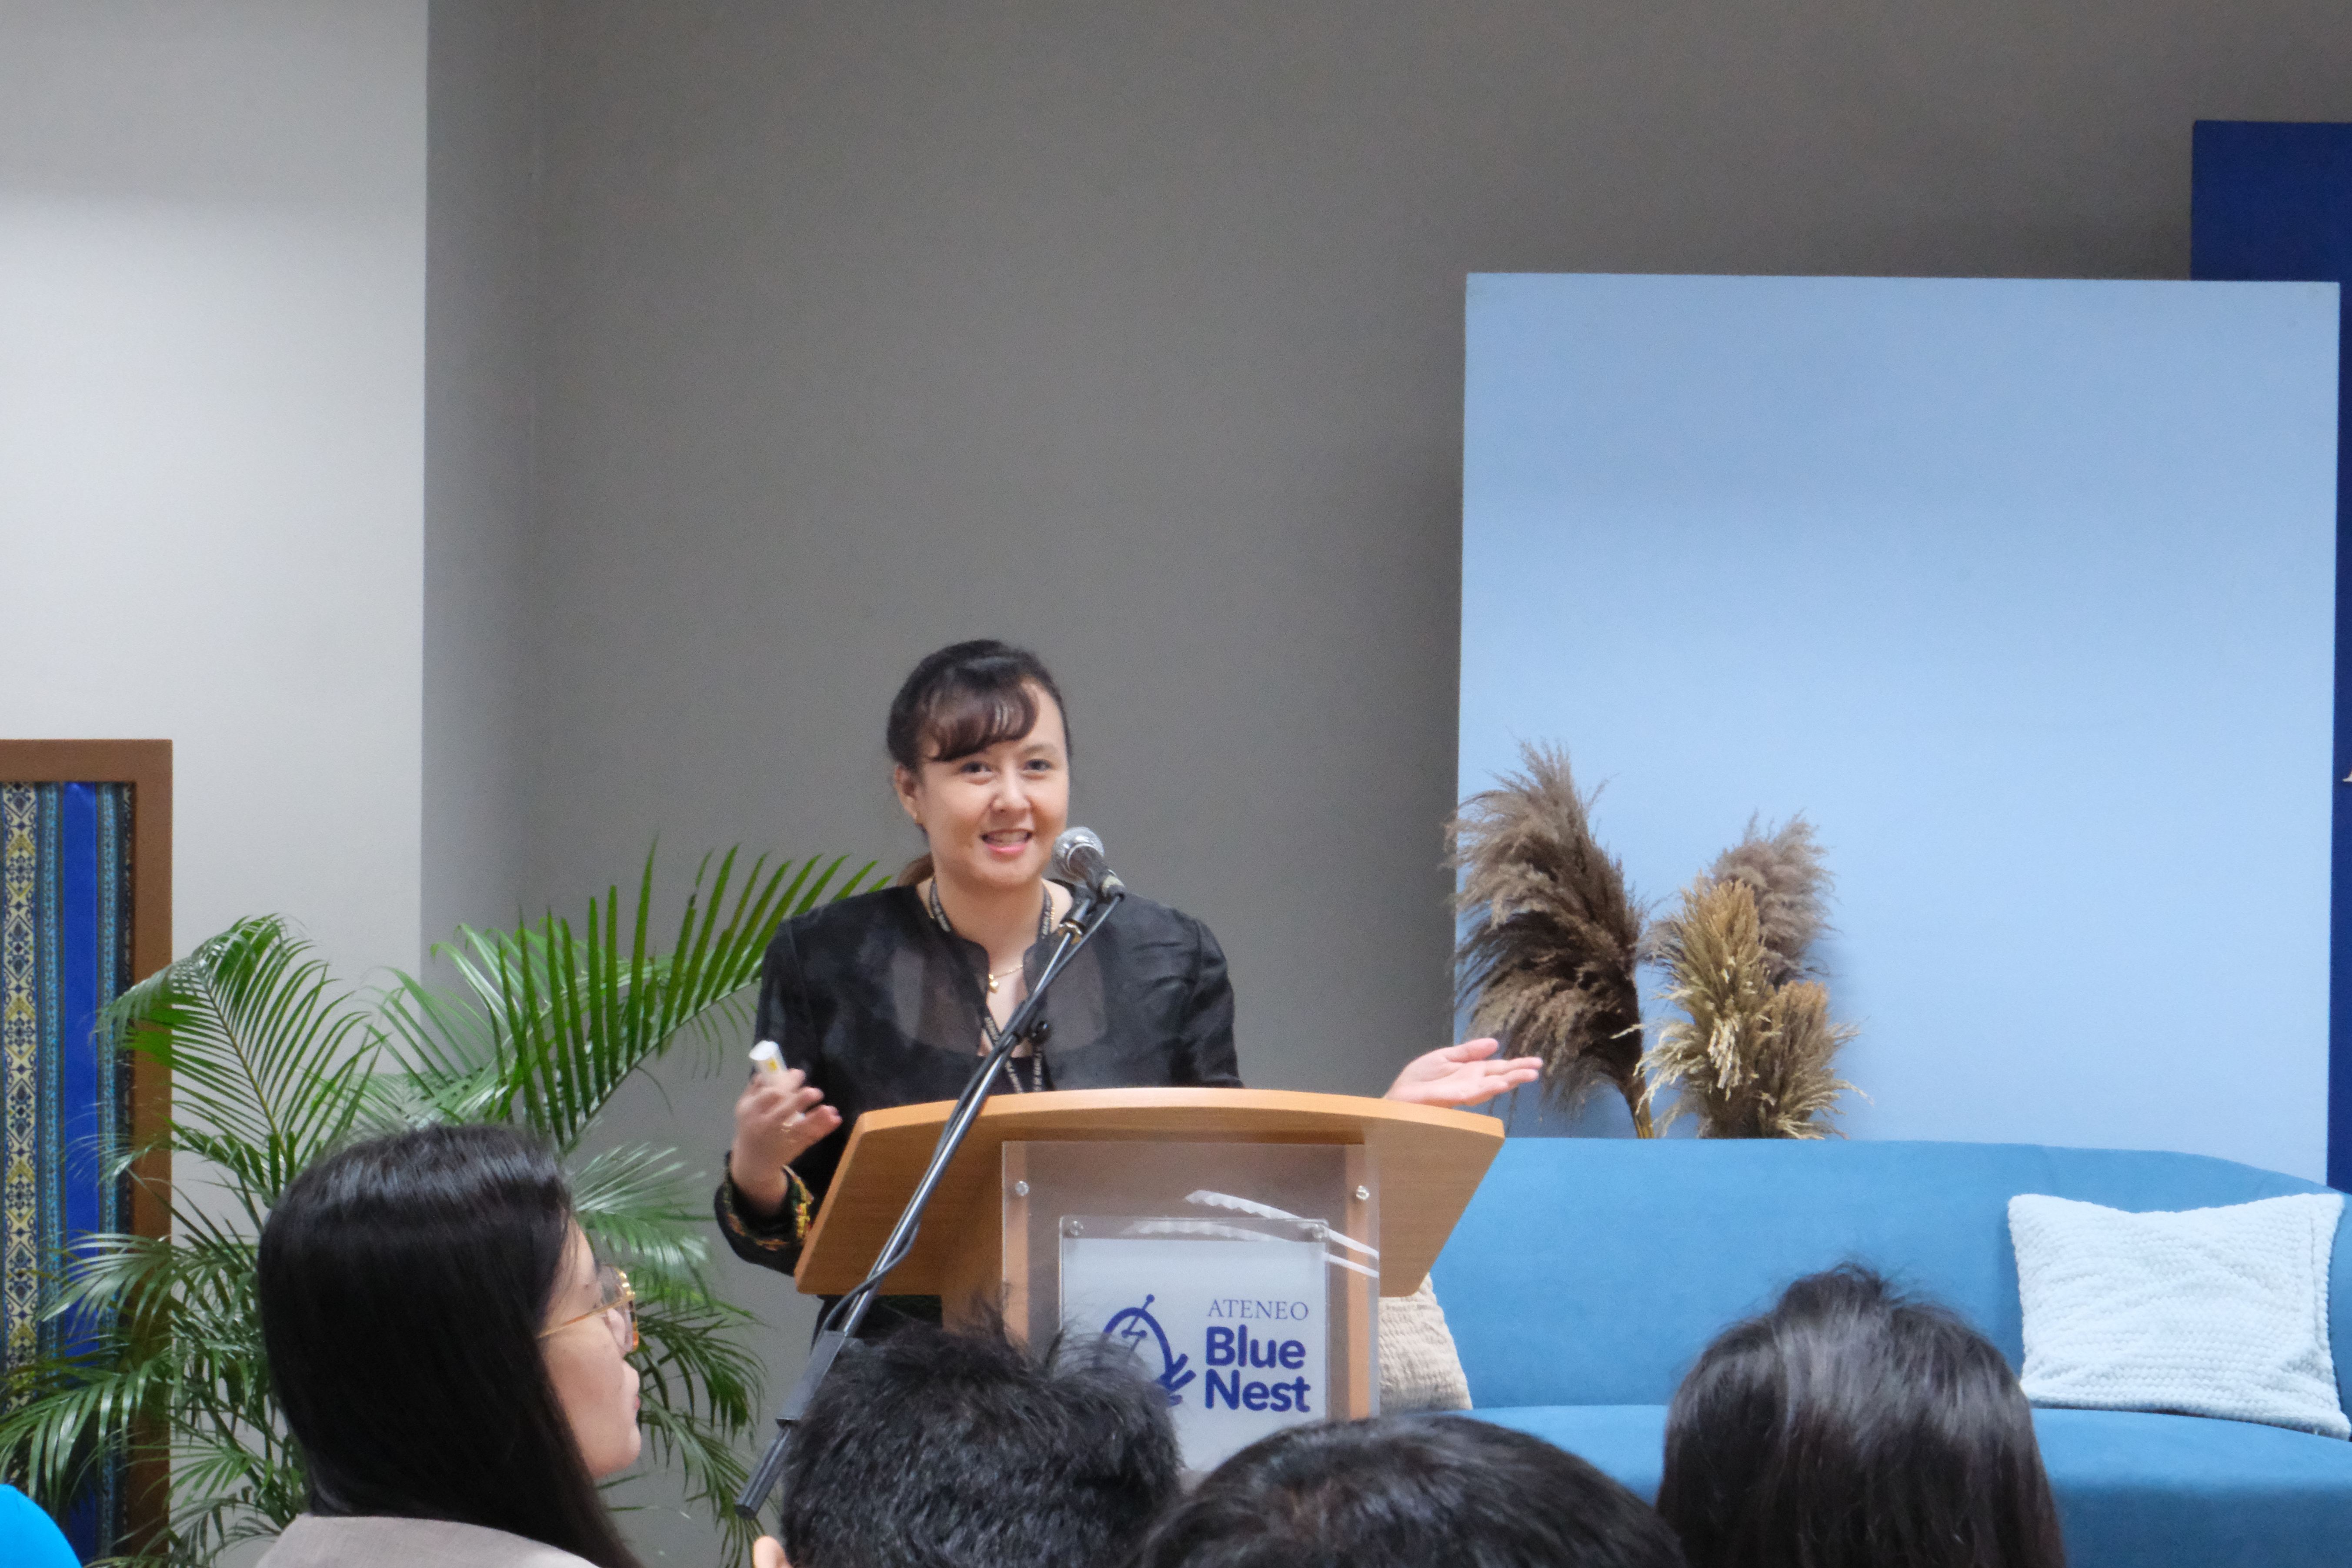 Dr. Kendra Gotangco Gonzales, Director of the Ateneo Institute of Sustainability